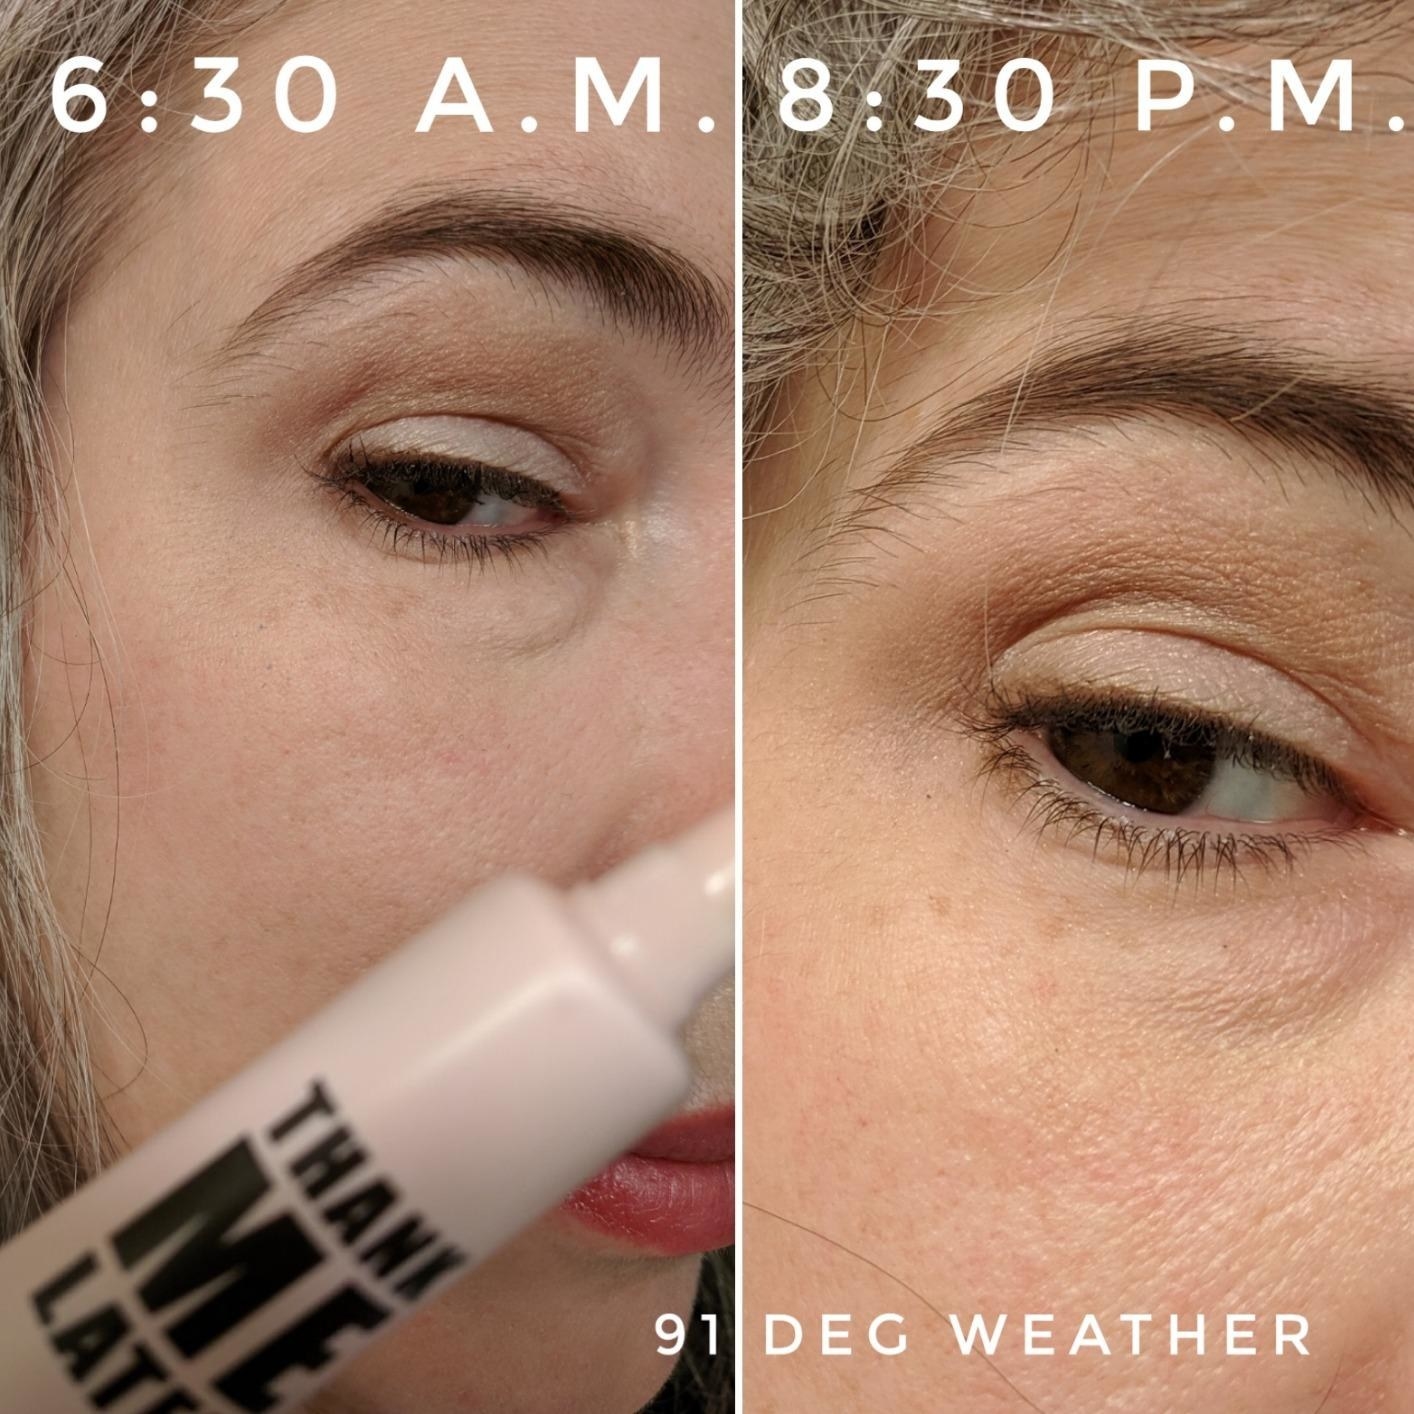 Before and after photos of a reviewer&#x27;s eye makeup at 6:30 am and 8:30 pm. There is hardly any creasing